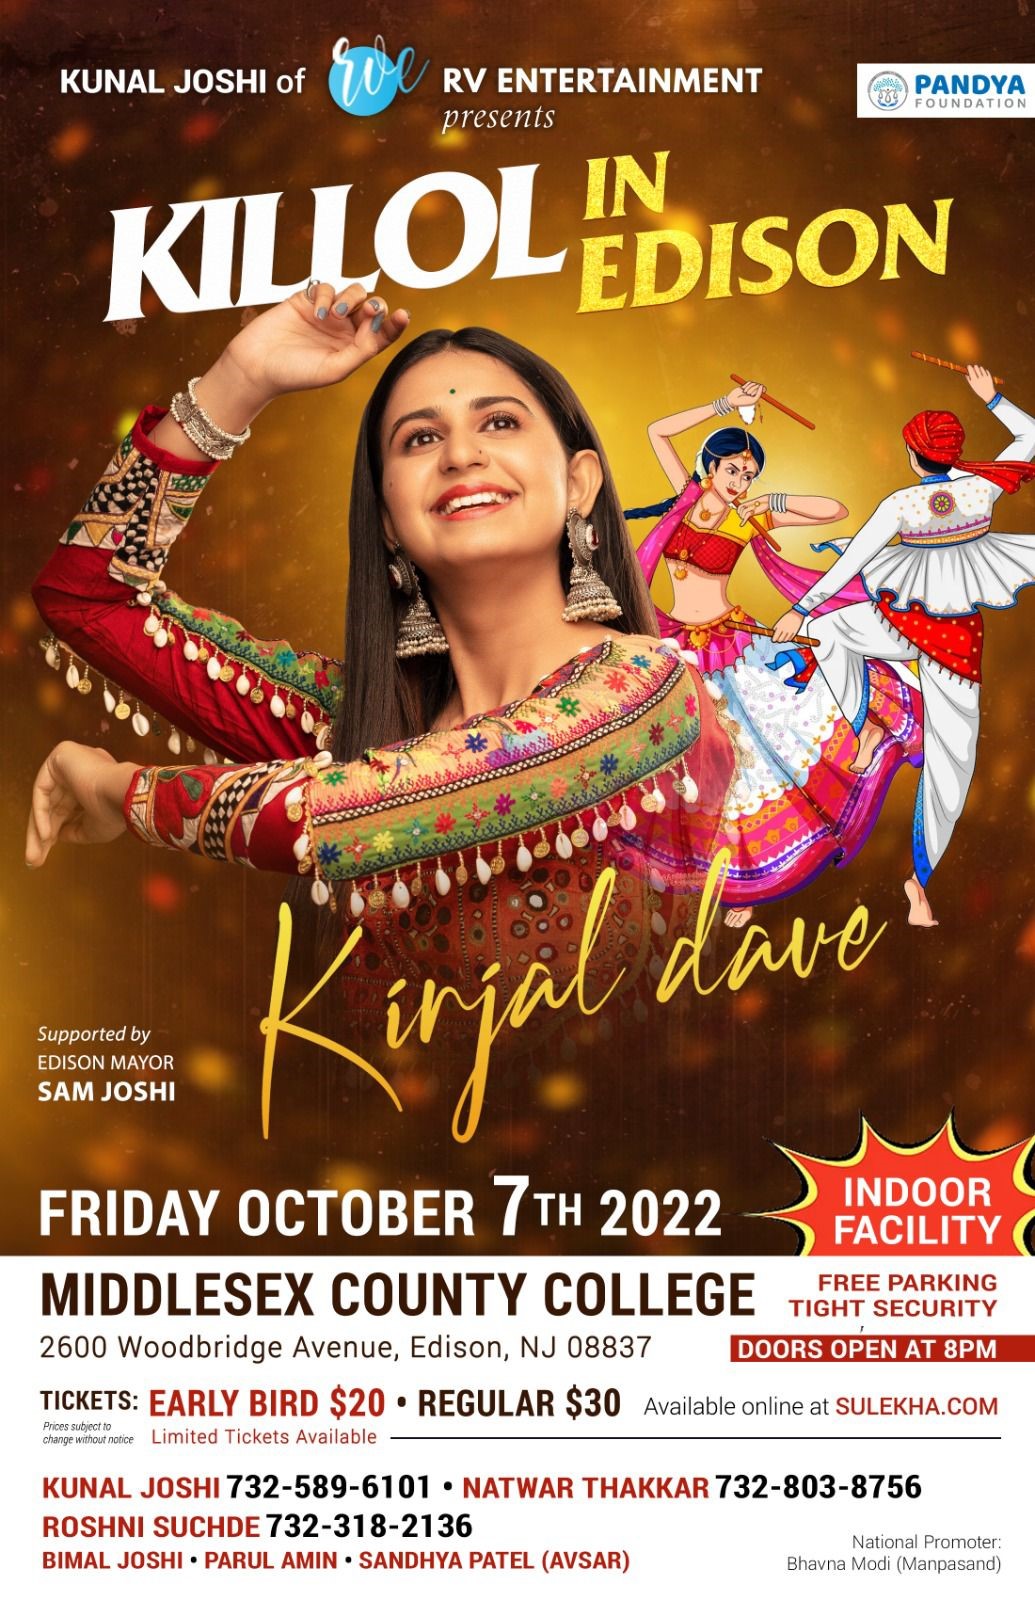 Garba with Kinjal dave at Middlesex County College Friday October 7th, 2022 Killo in Edison with Kinjal Dave on Oct 07, 20:00@Middlesex county college Edison NJ - Buy tickets and Get information on Desi Events desievents.org